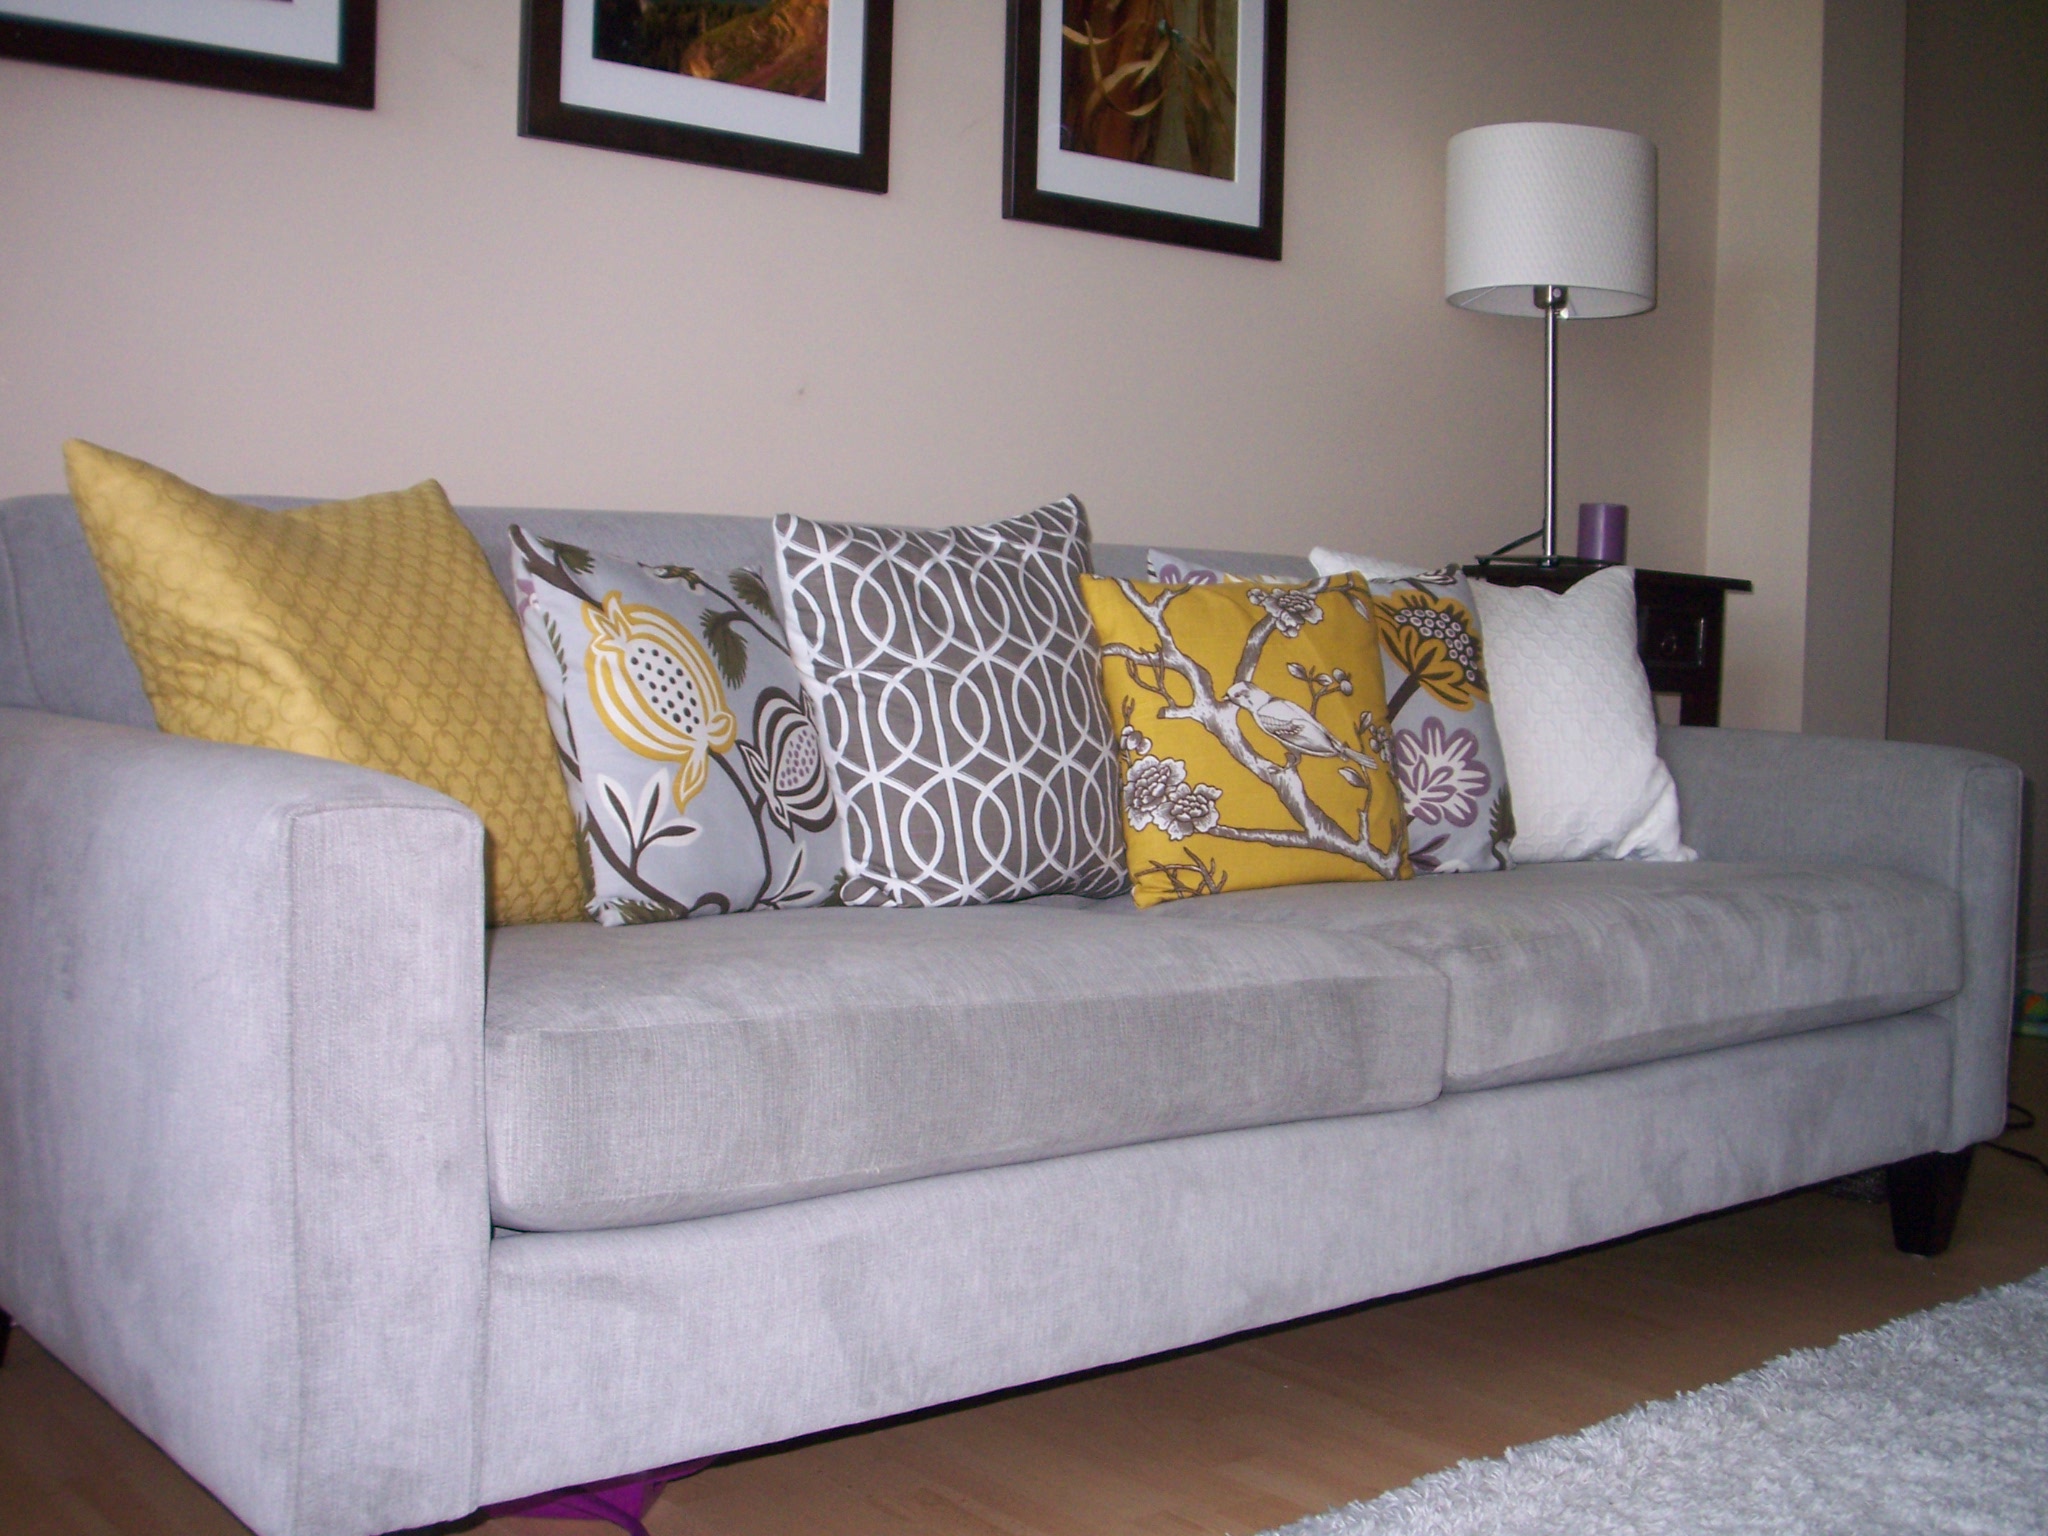 My couch with home-made pillows